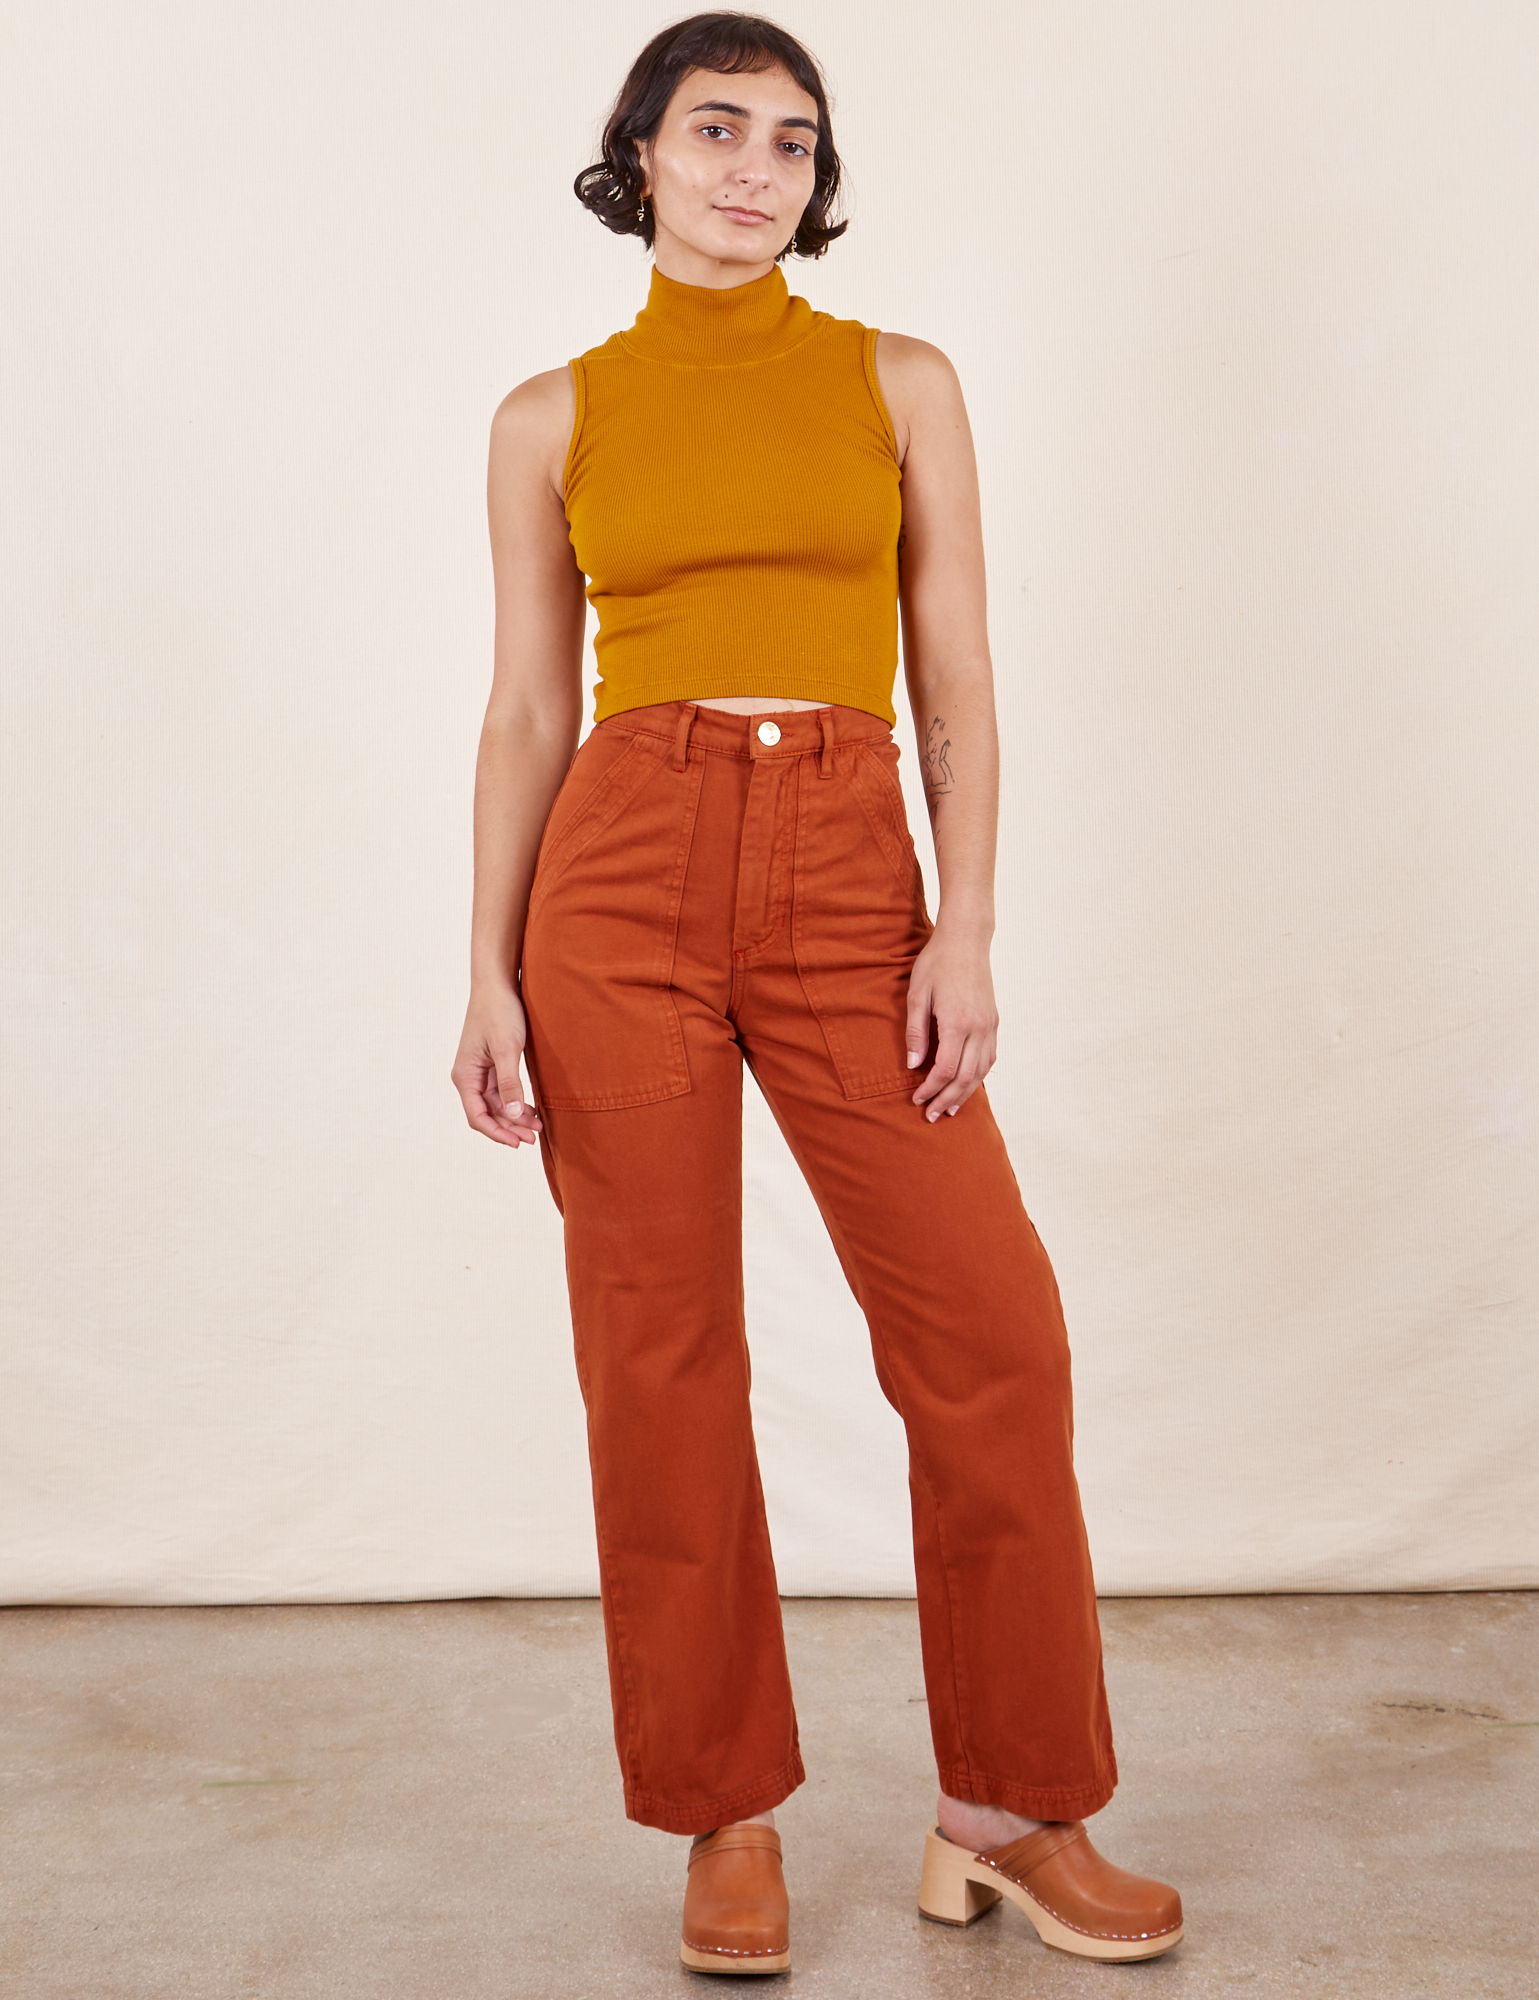 Soraya is 5&#39;2&quot; and wearing Petite XXS Work Pants in Burnt Terracotta paired with Sleeveless Turtleneck in Spicy Mustard